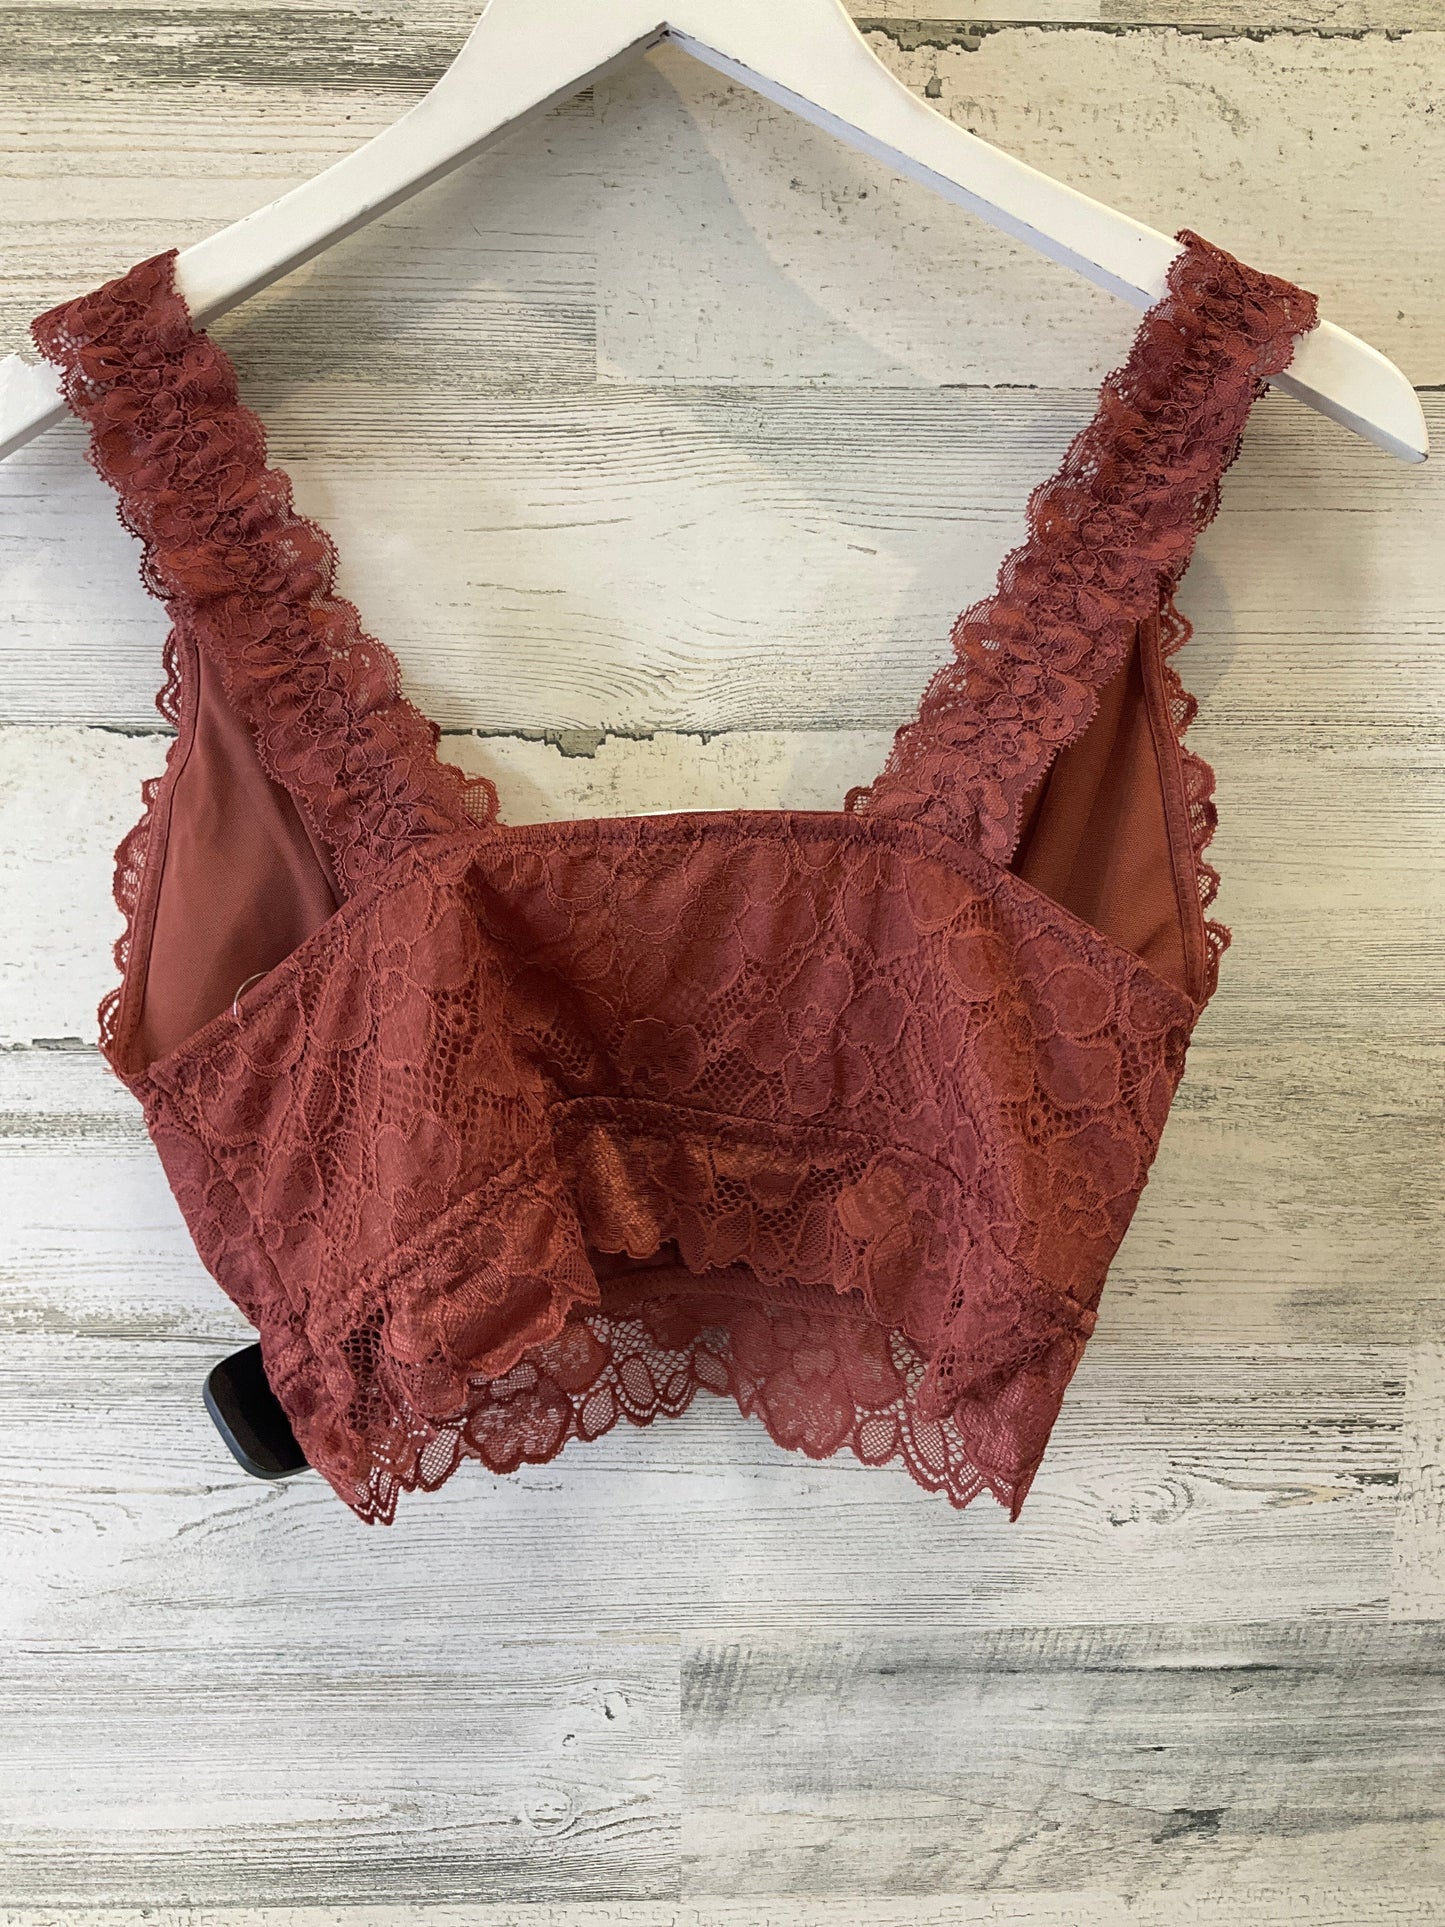 Red Bralette Maurices, Size M